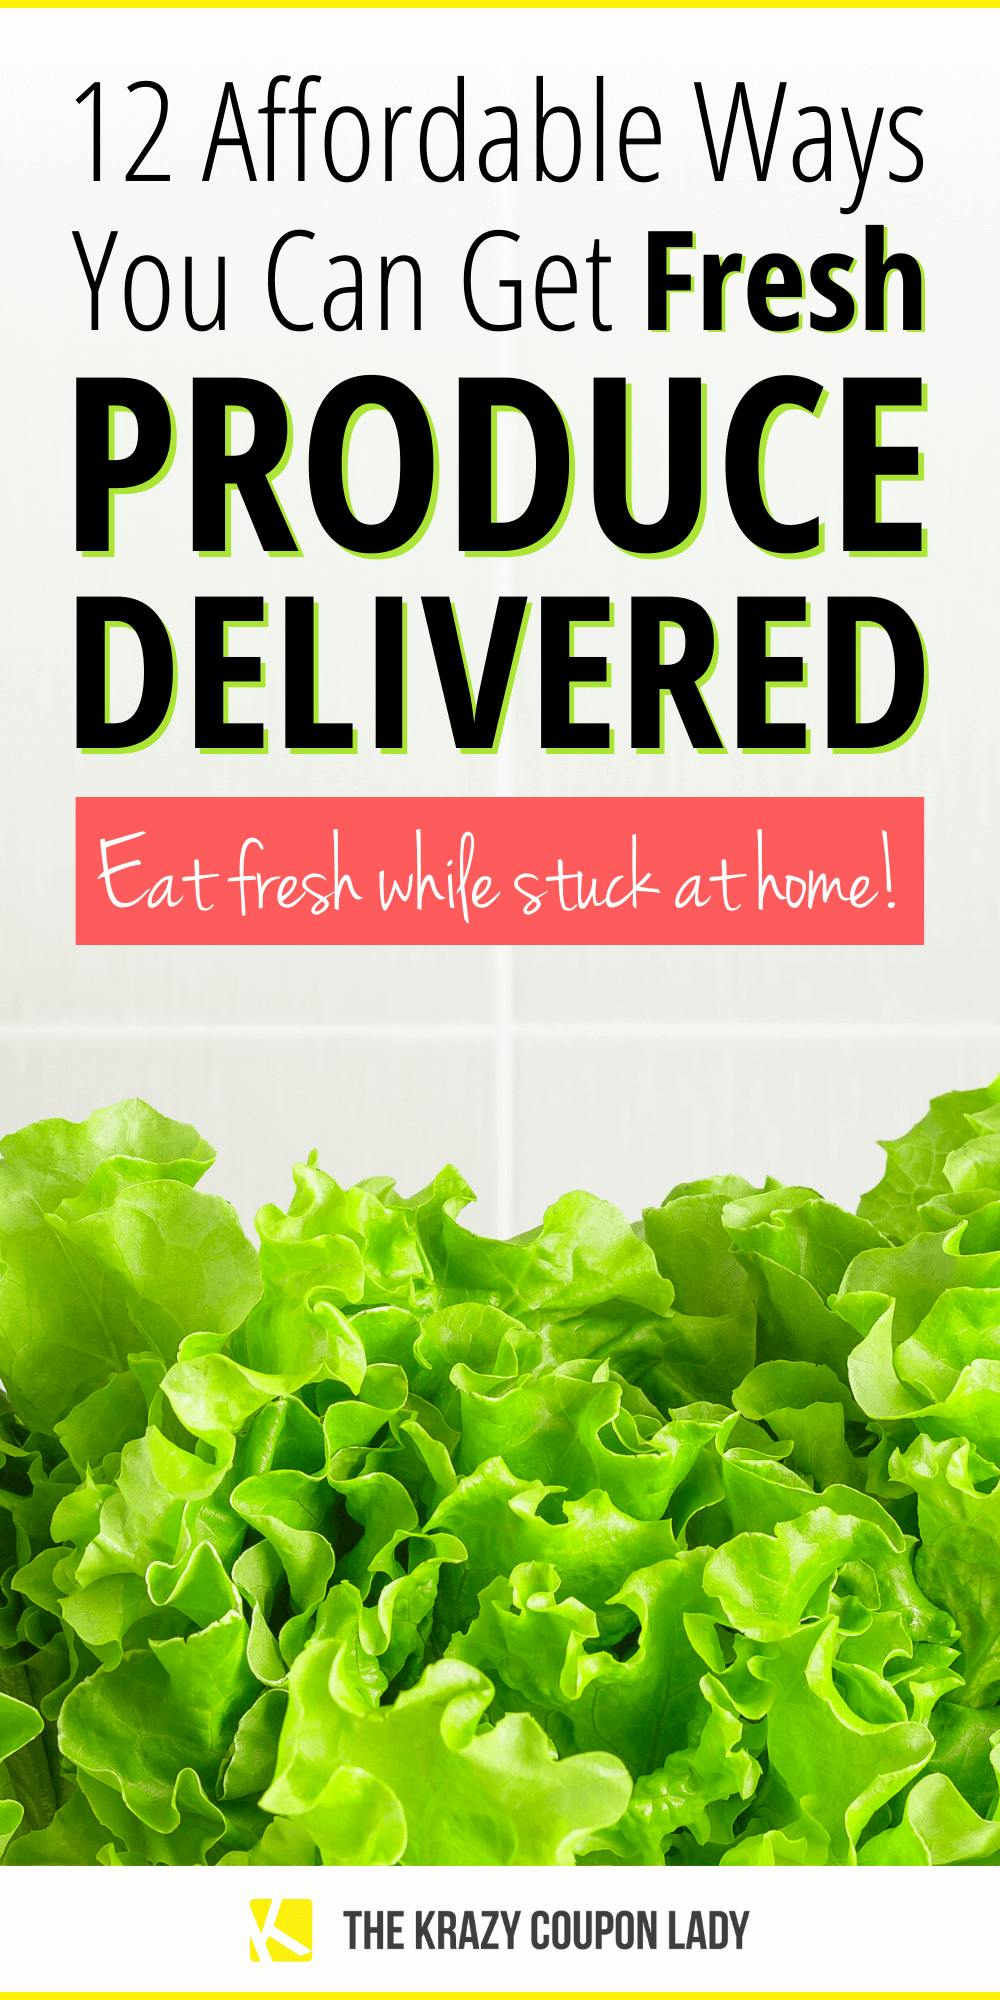 12 Affordable Ways to Get Fresh Produce Delivery